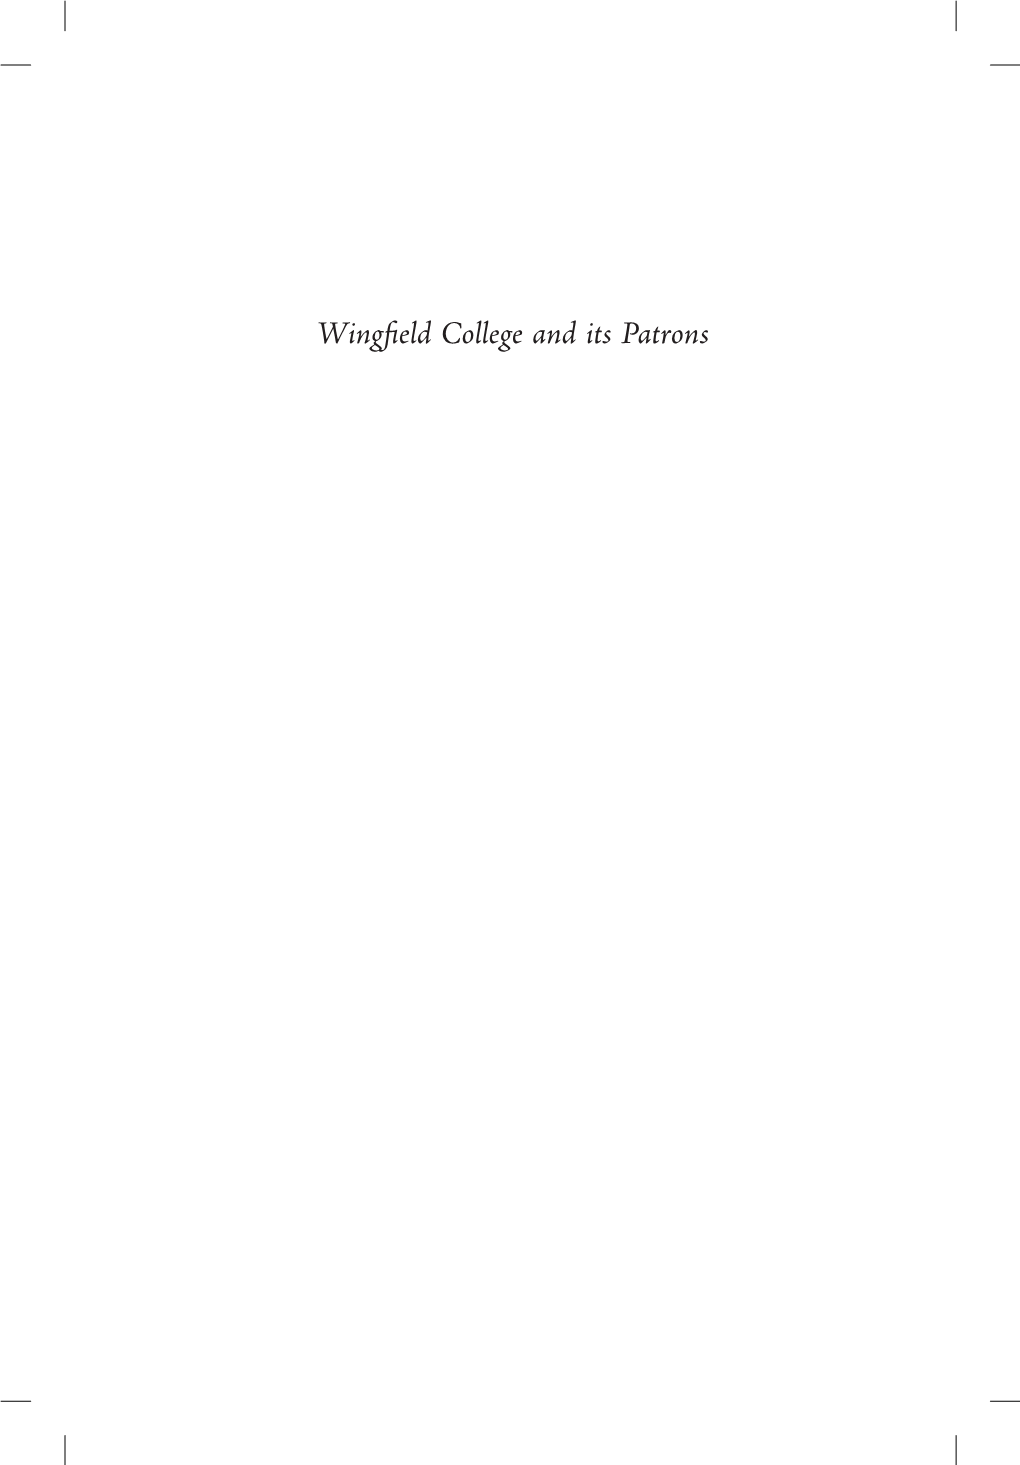 Wingfield College and Its Patrons